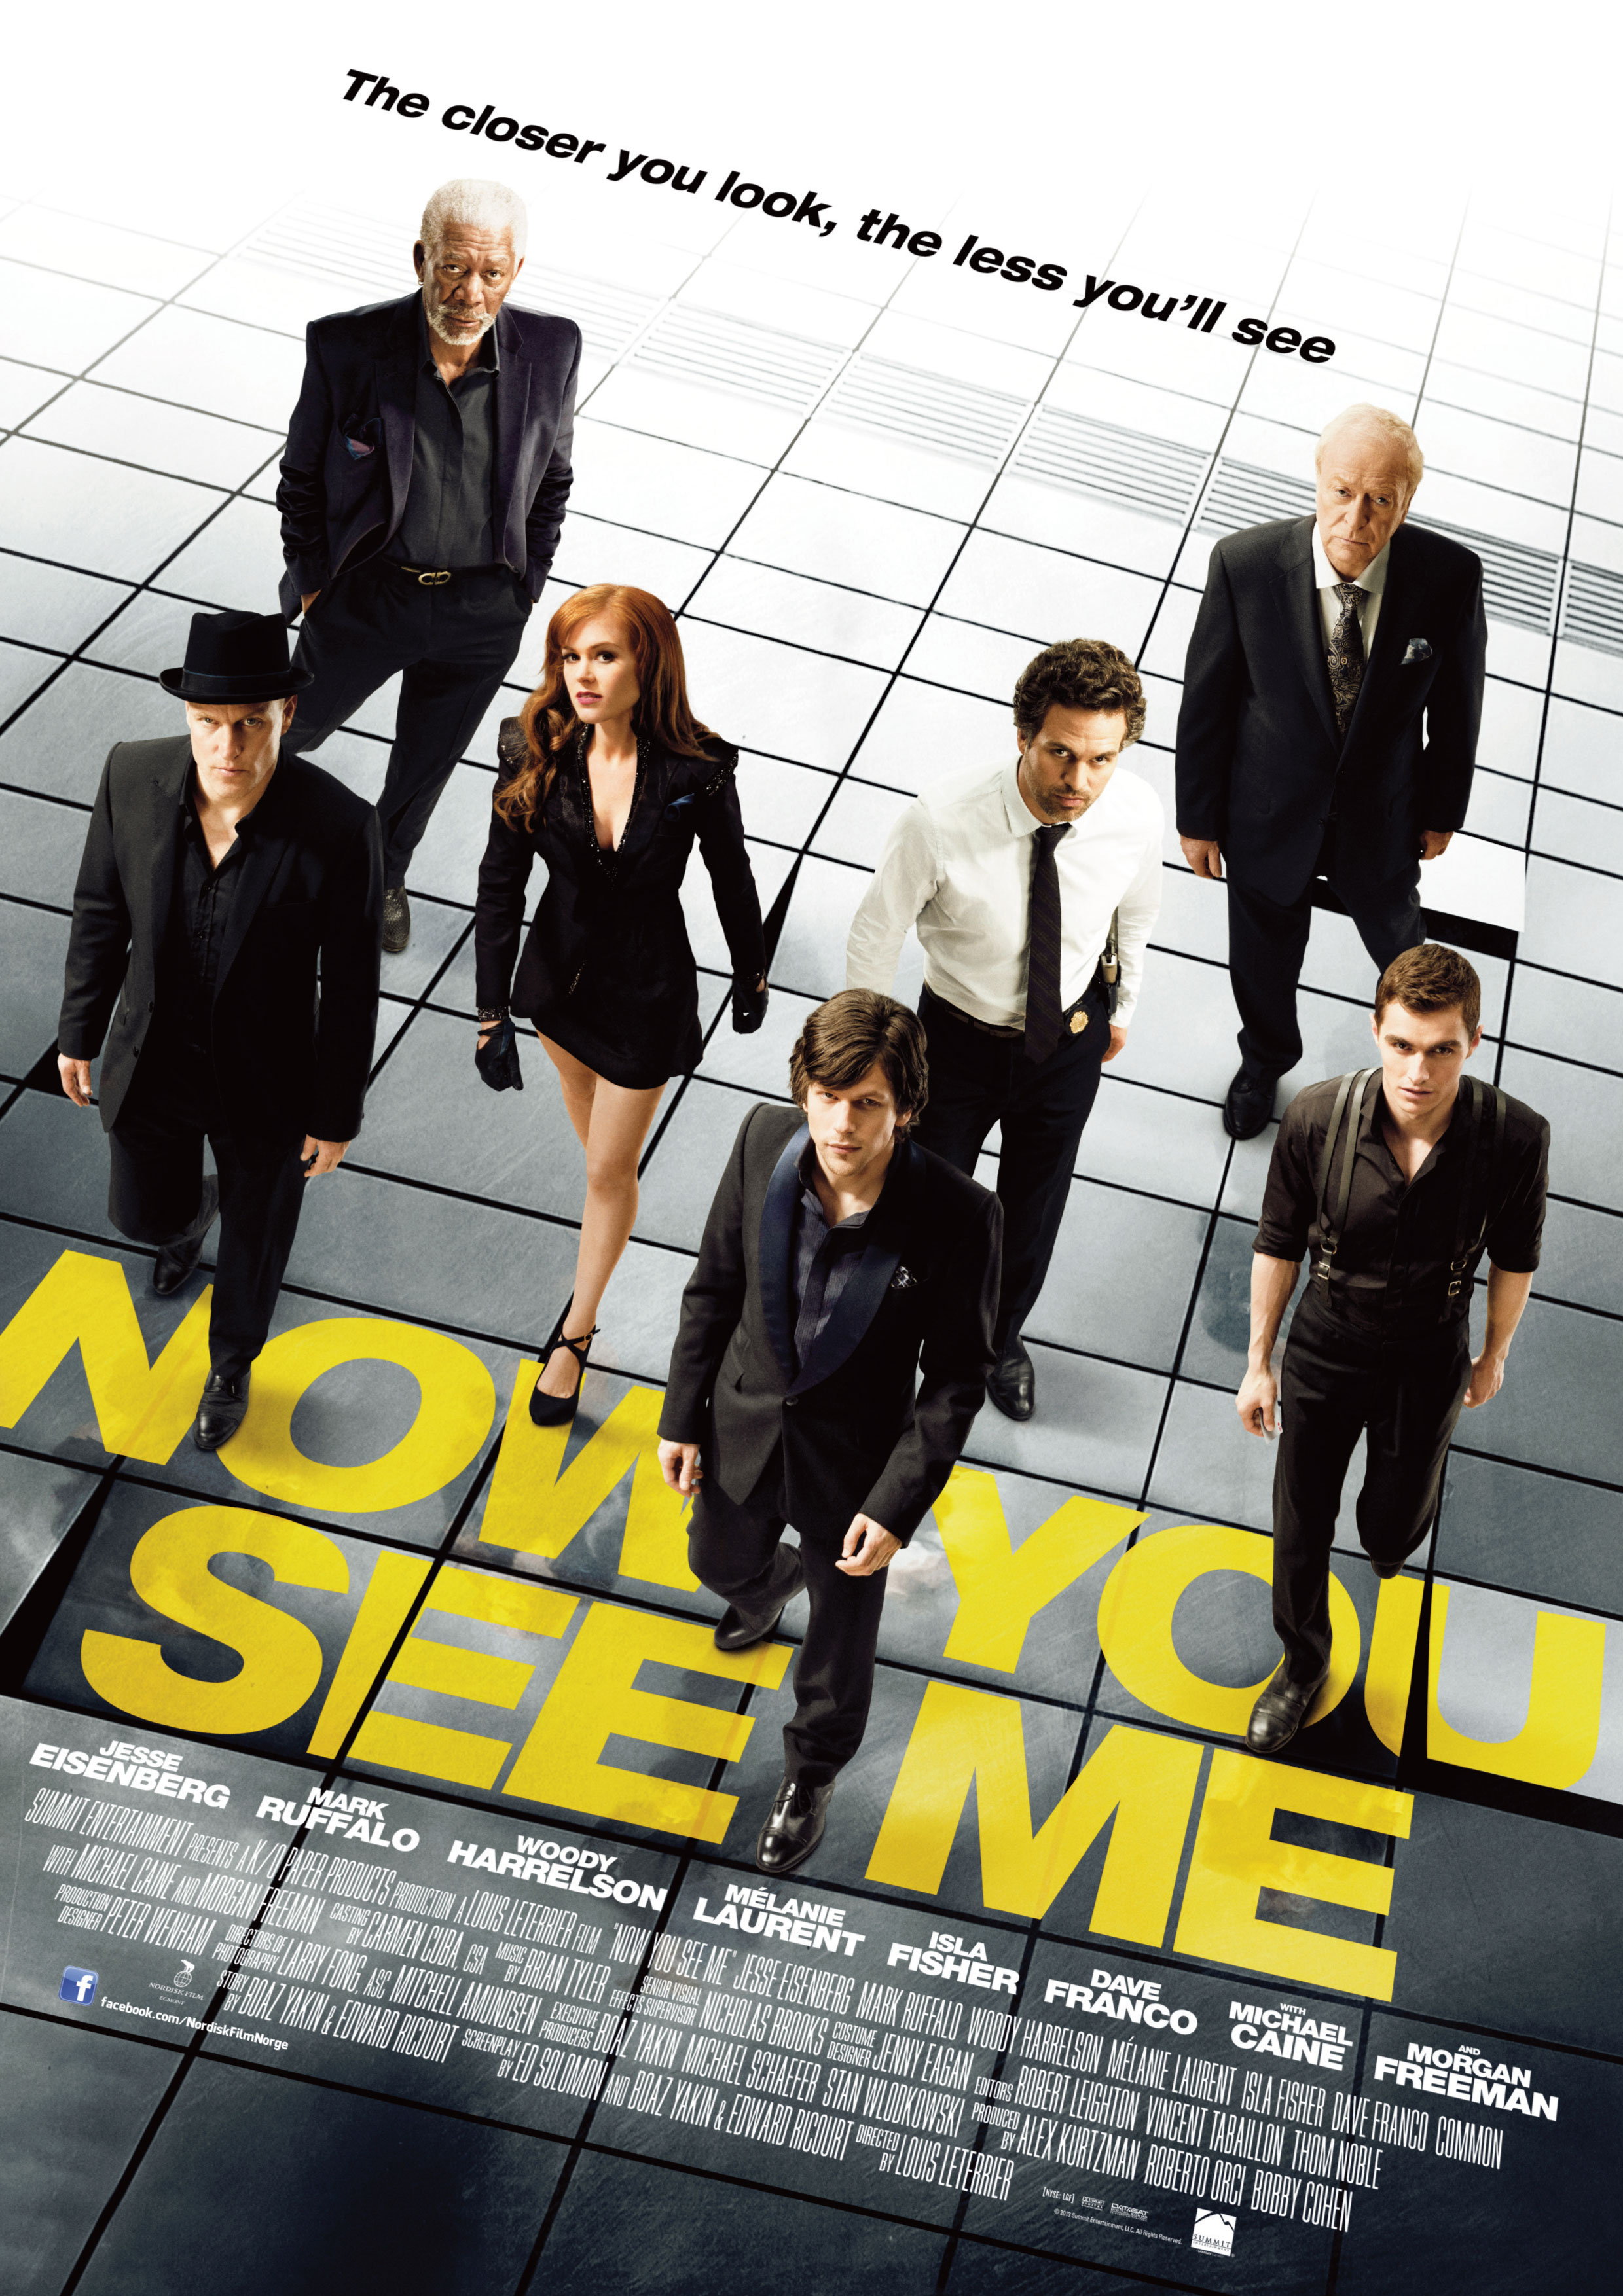 Now You See Me #8